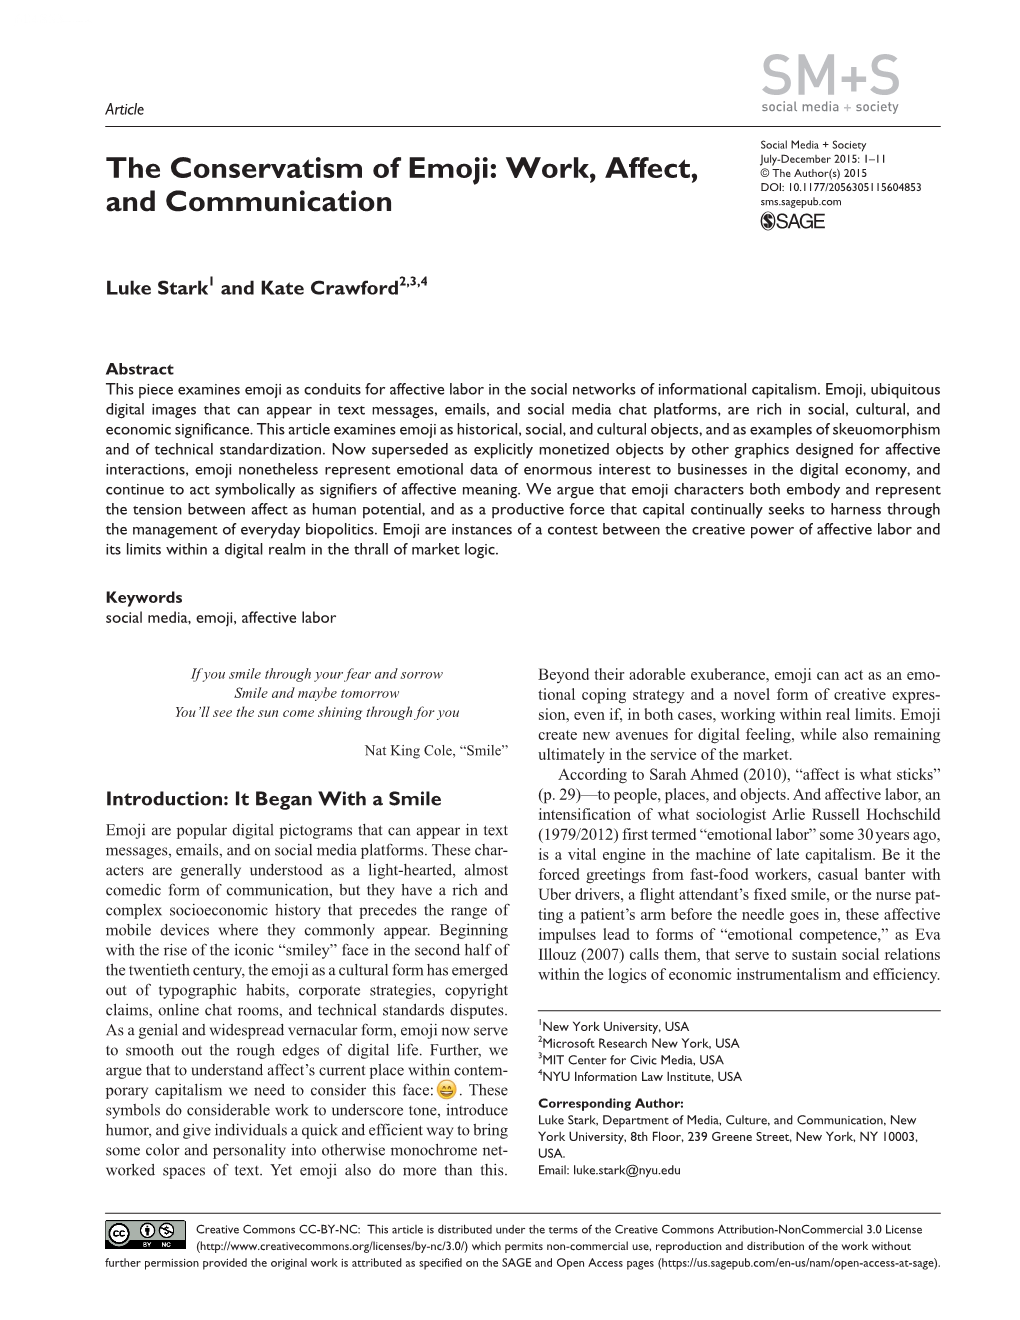 The Conservatism of Emoji: Work, Affect, and Communication